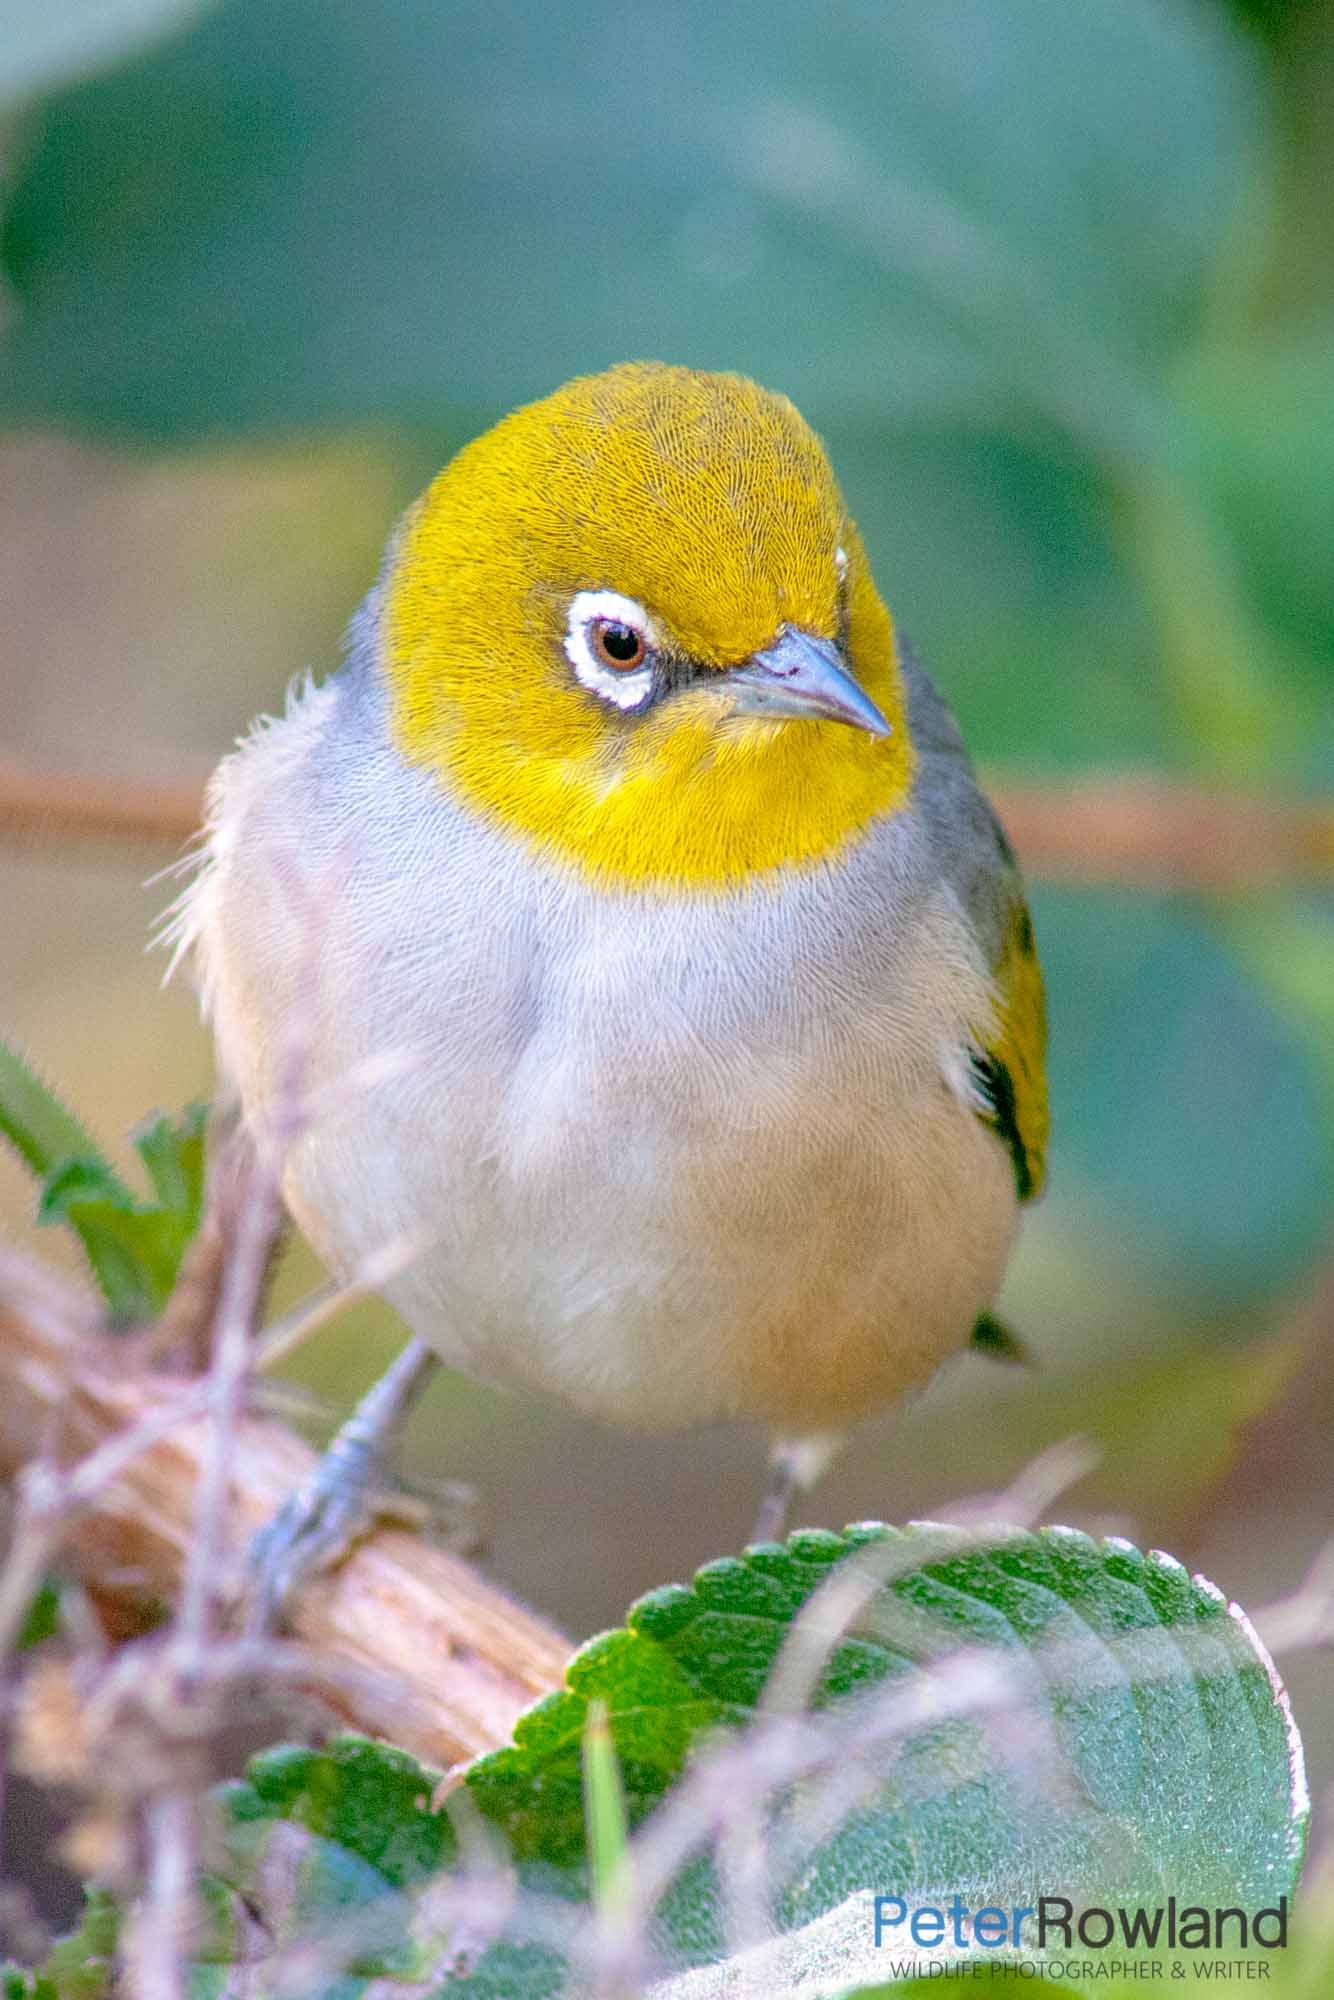 A Silvereye (Zosterops lateralis) perched on a small branch